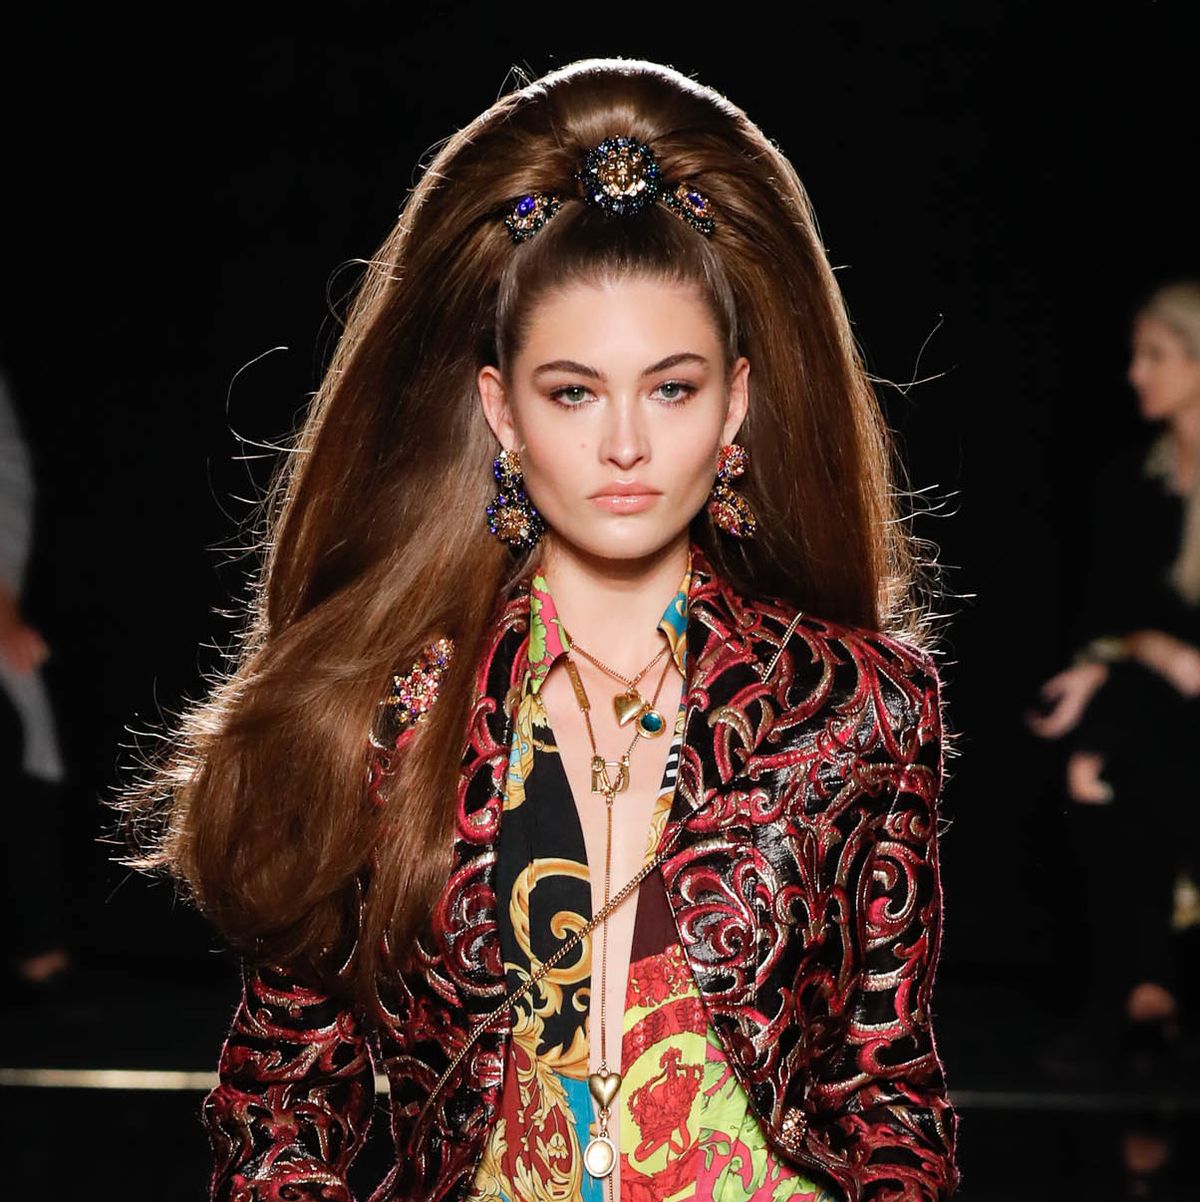 The Hair at Versace's Show Was So Big and Full of Secrets - Model Grace  Elizabeth Hair at Versace New York City Fall 2019